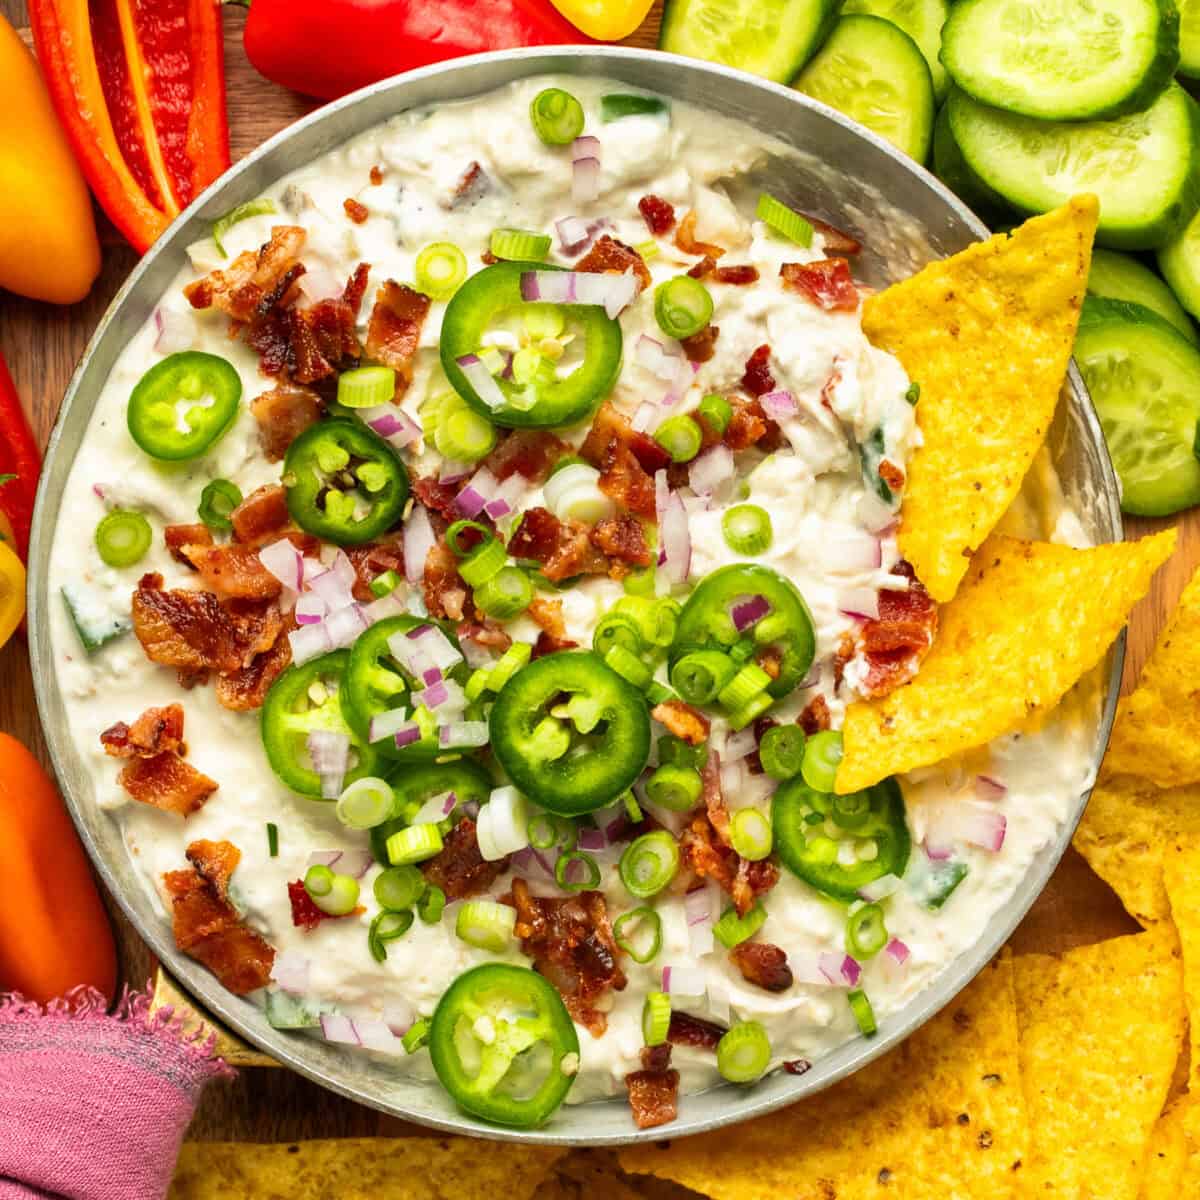 Jalapeno popper dip in a serving bowl topped with bacon, onions, jalapenos and chips and veggies around for serving.